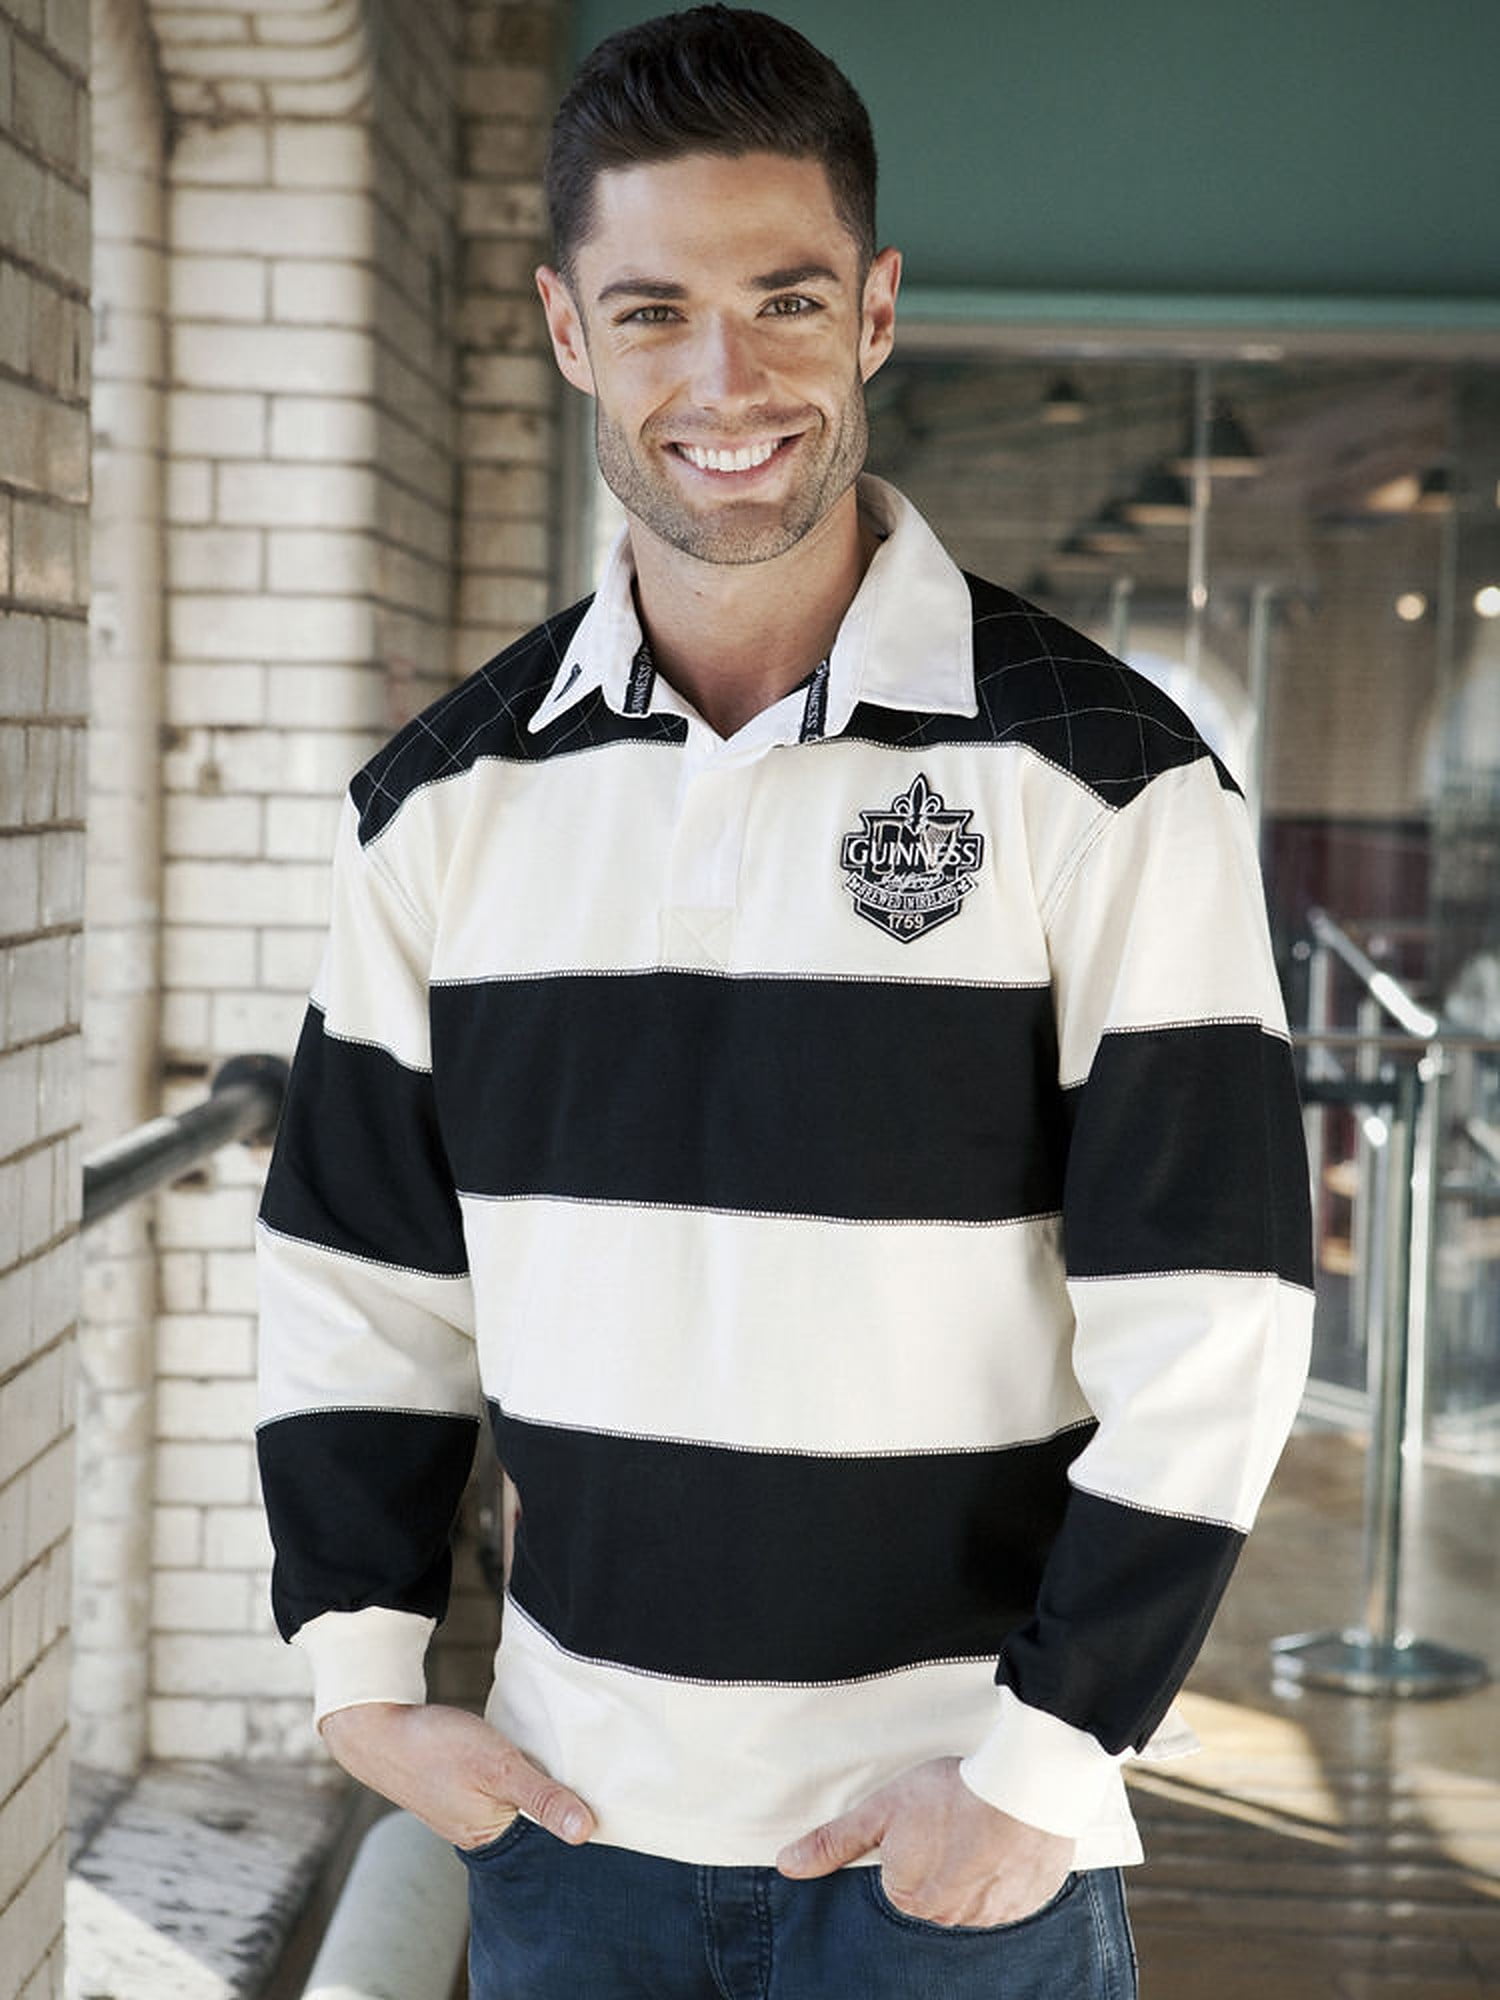 Guinness Black and Cream Classic Long Sleeve Rugby Jersey